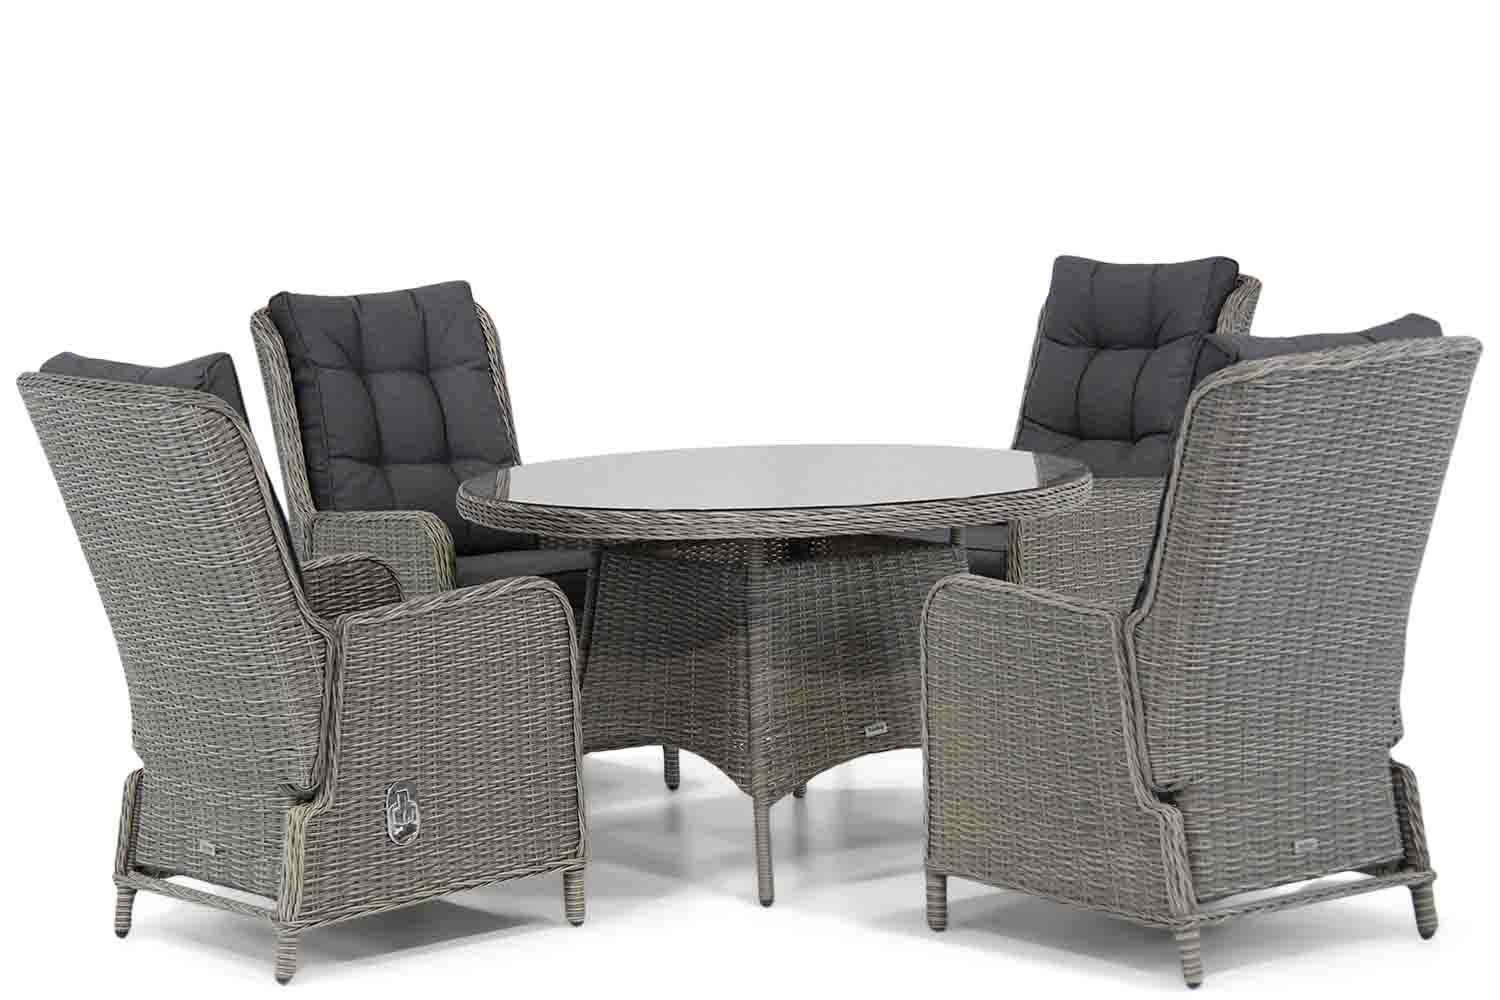 Garden Collections KingstonAberdeen 120 cm rond dining tuinset 5 delig